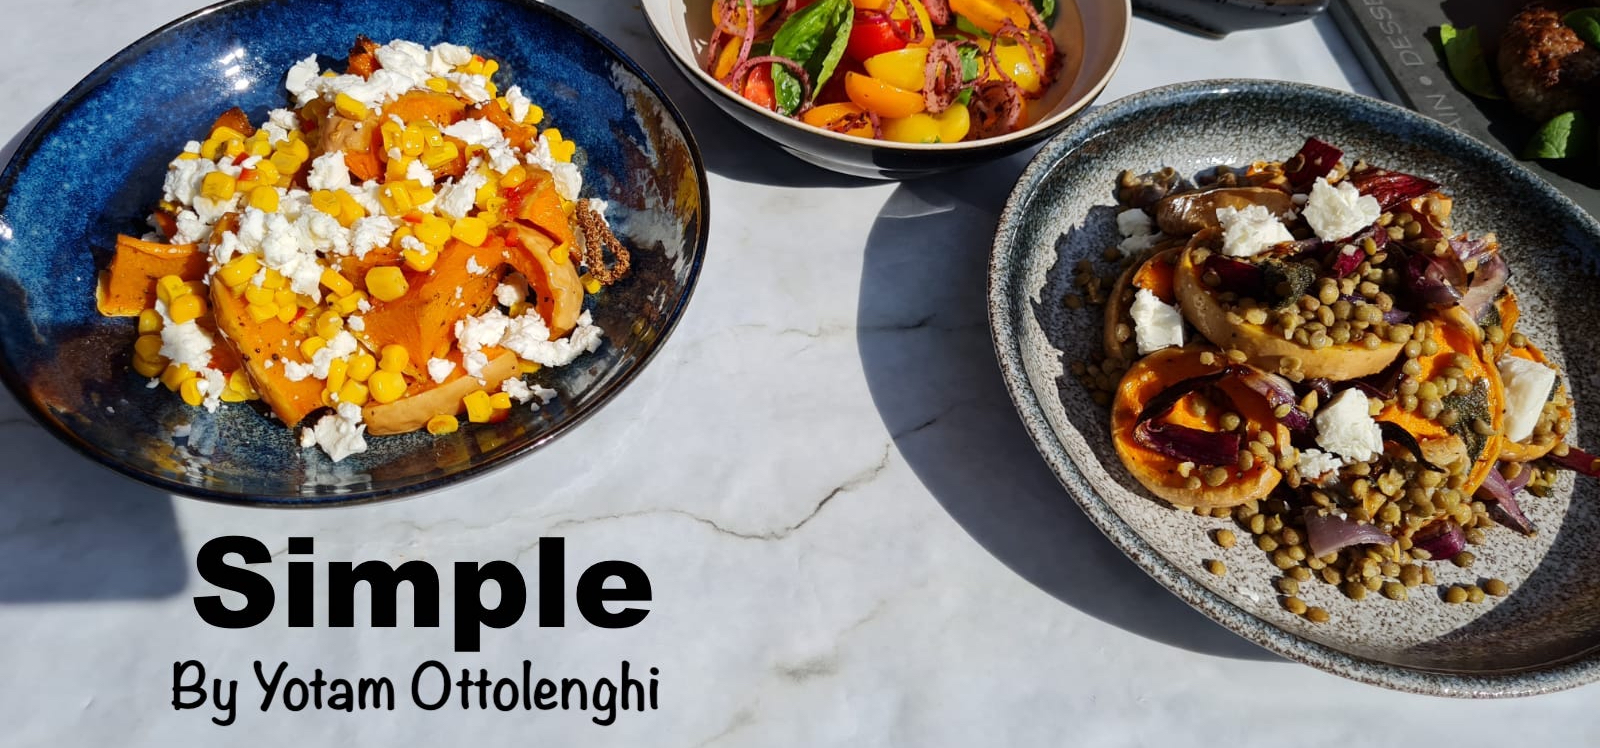 Ottolenghi book of the month 1.jpg